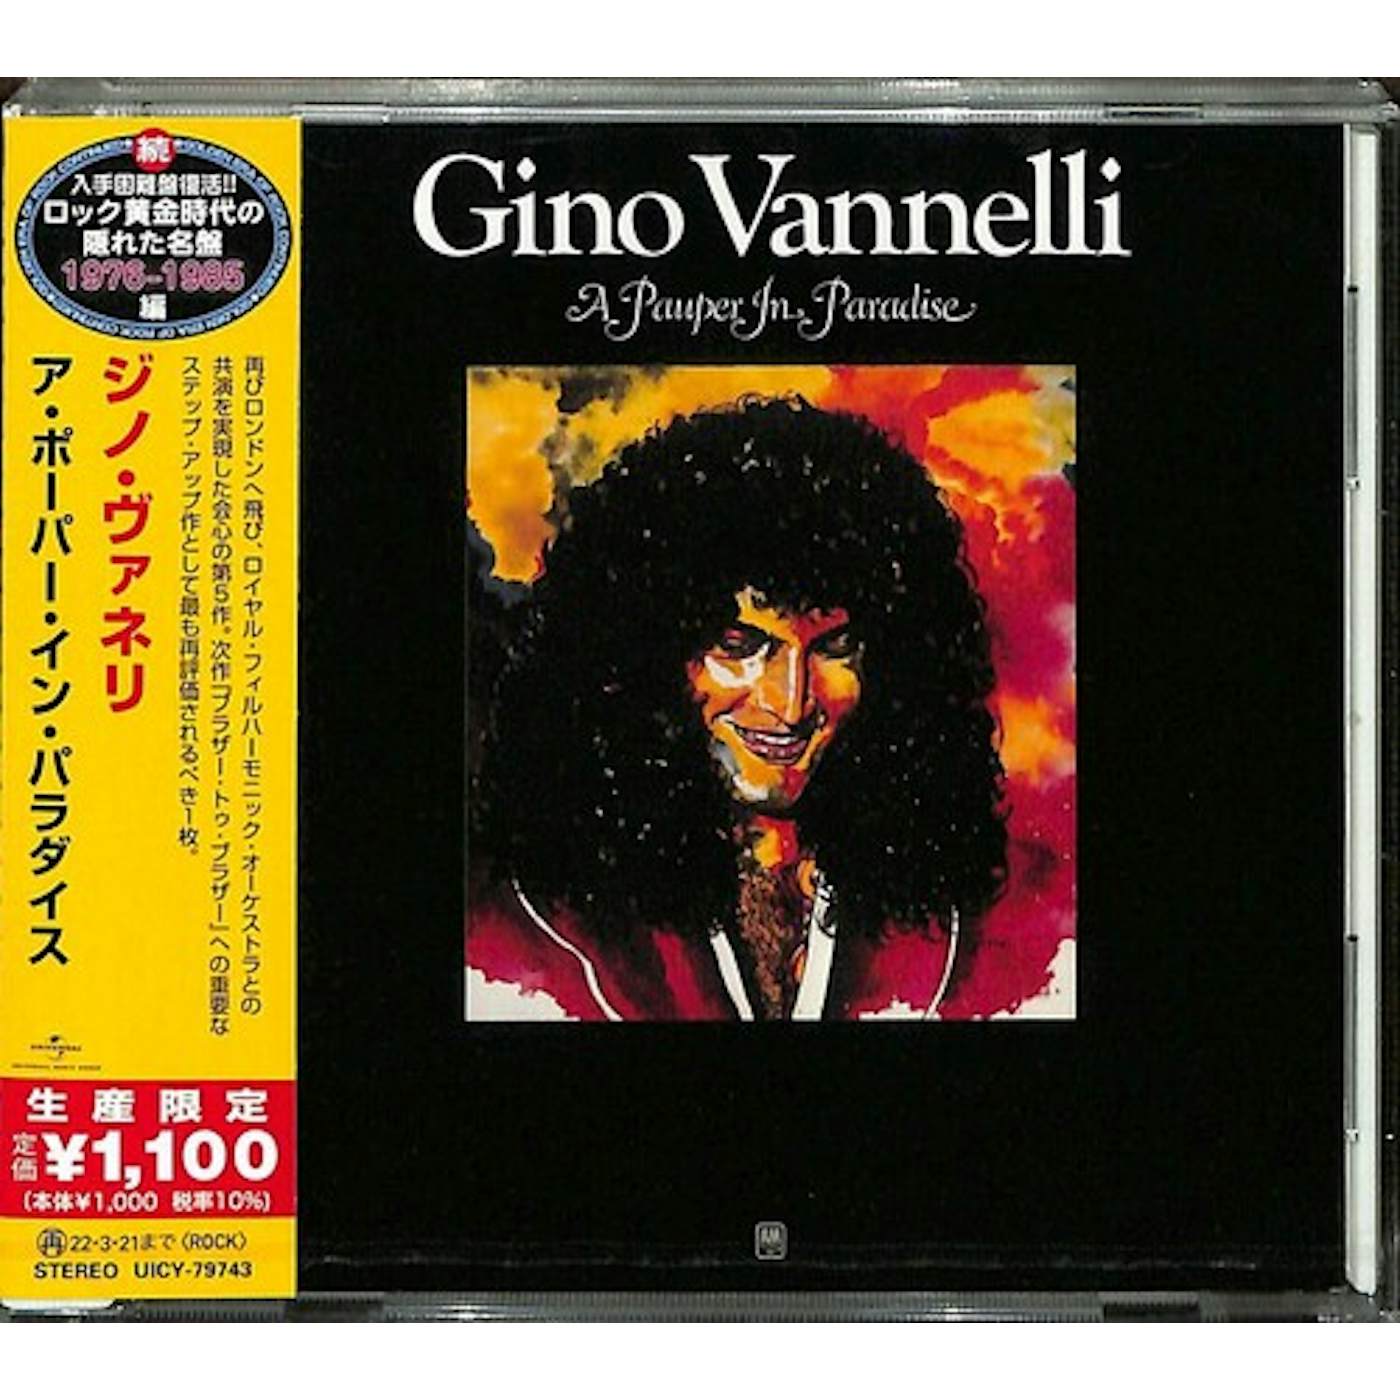 Gino Vannelli PAUPER IN PARADISE CD